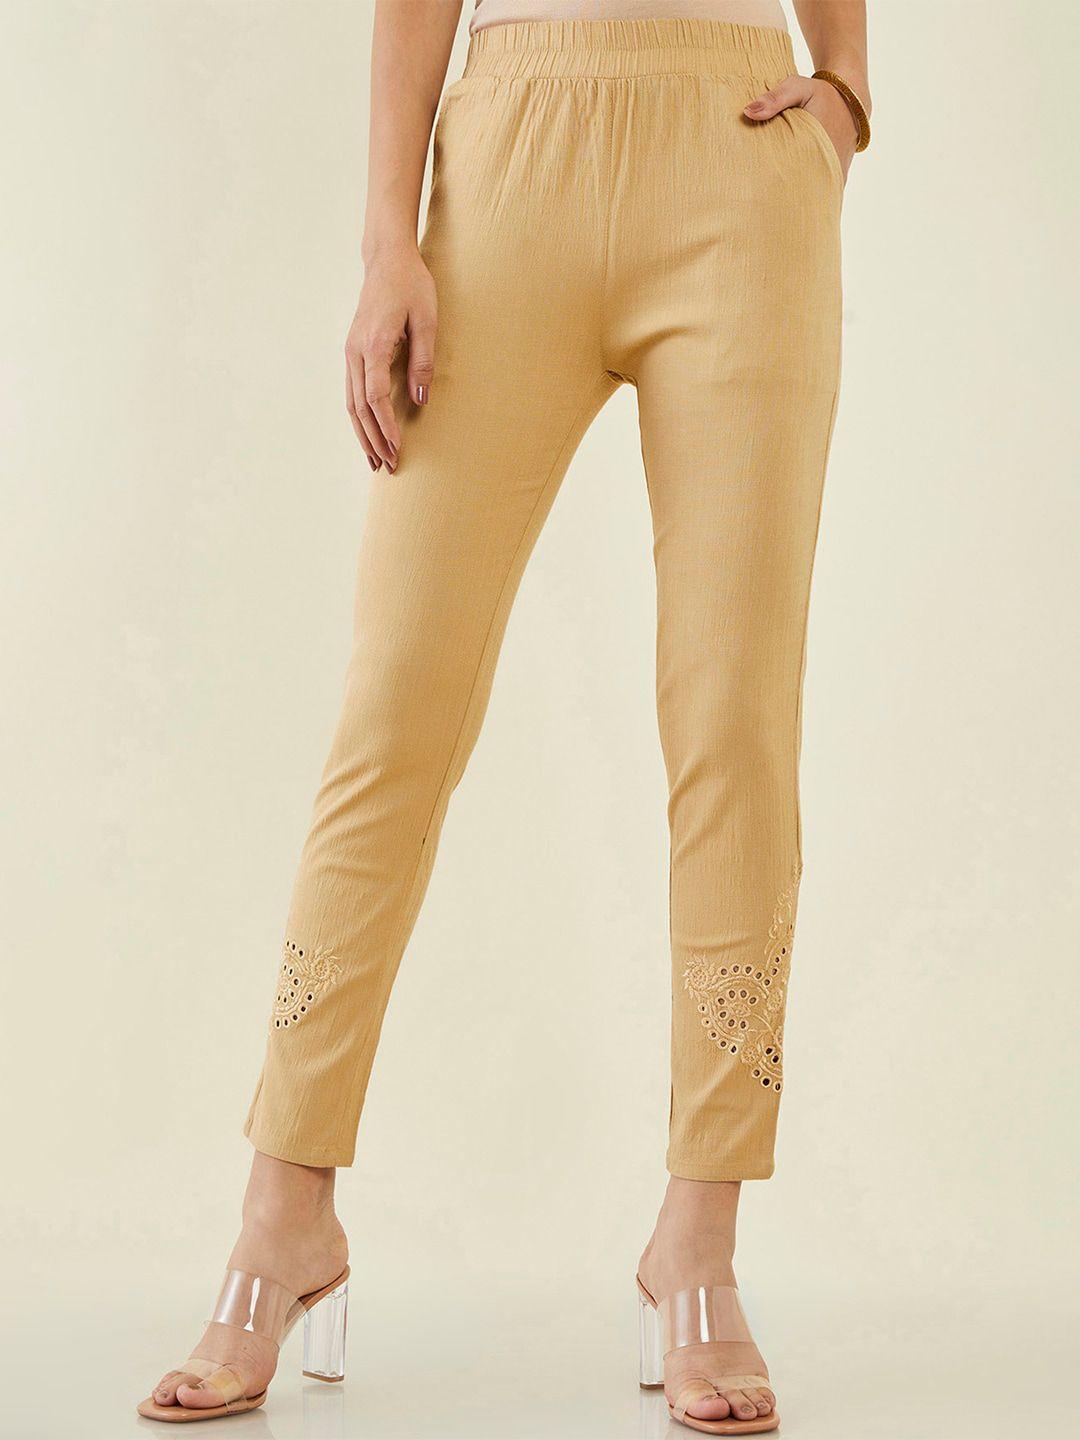 soch cotton ankle length trousers